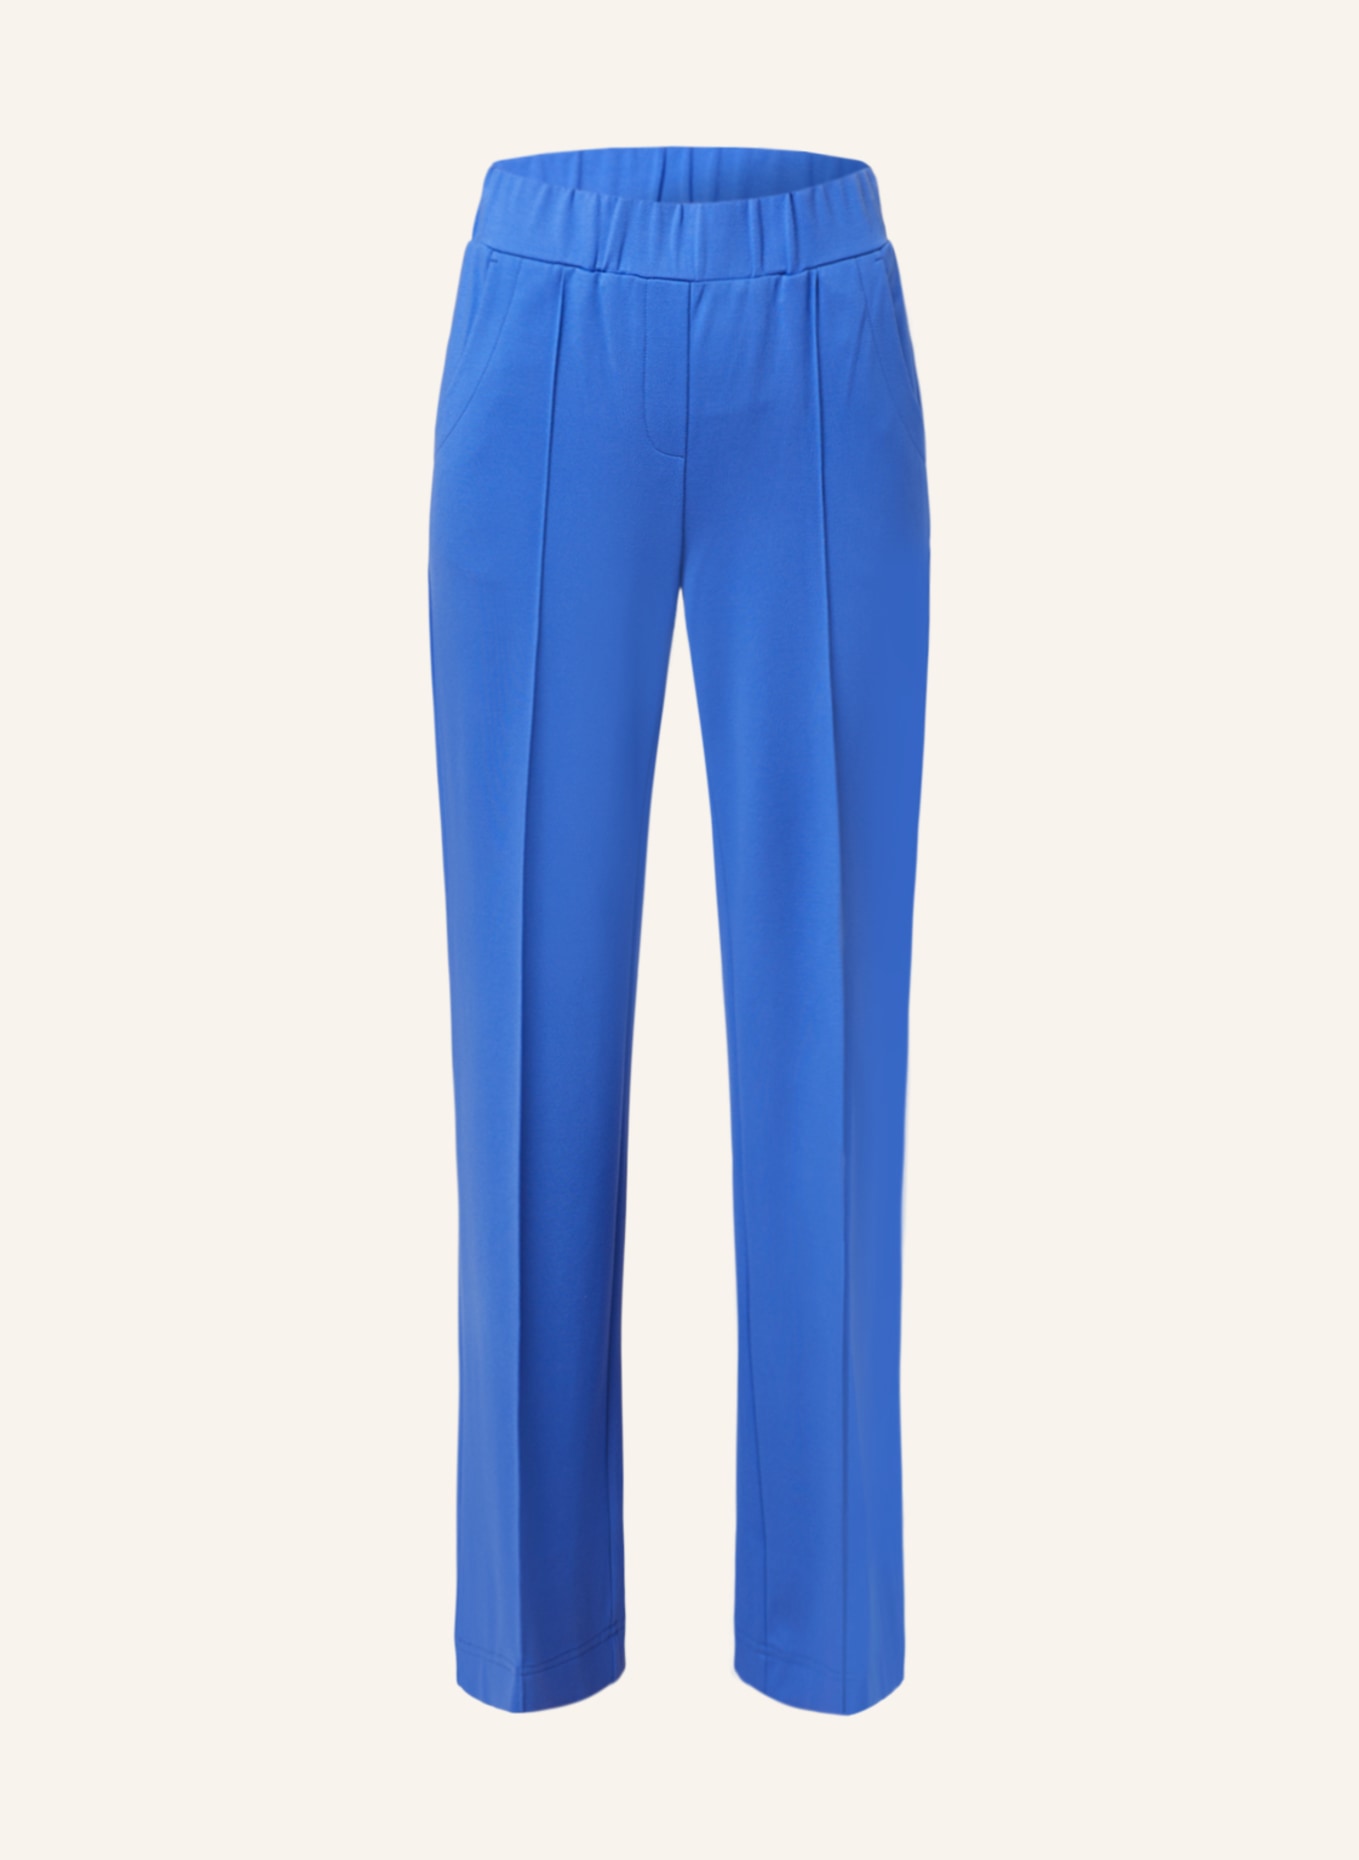 CATNOIR Pants in jogger style, Color: BLUE (Image 1)